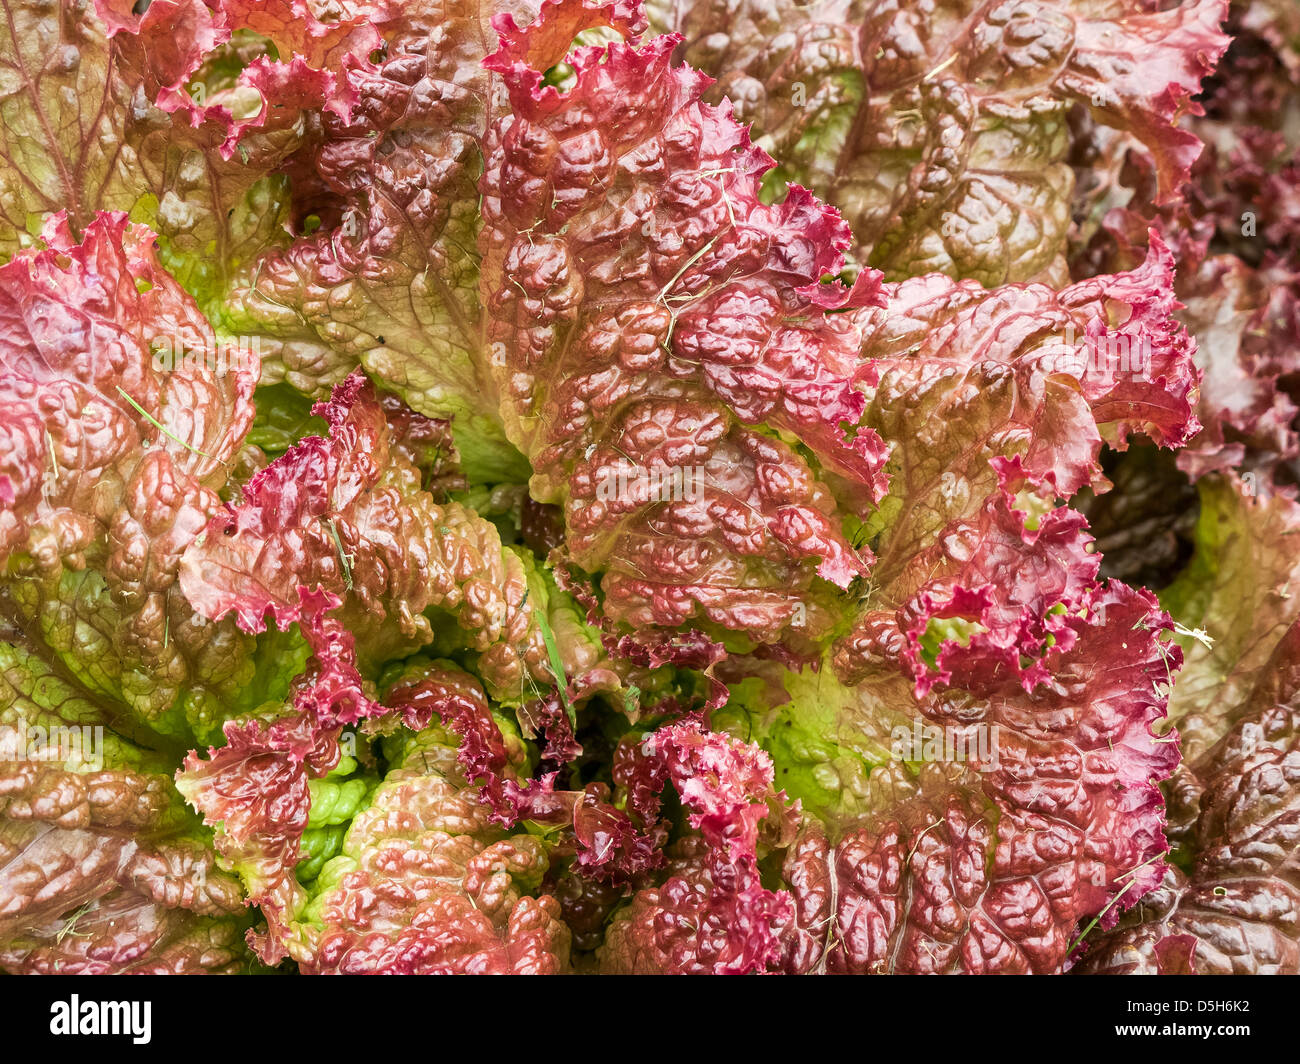 Red and green crinkly Lolla rossa Lettuce leaves close up Stock Photo